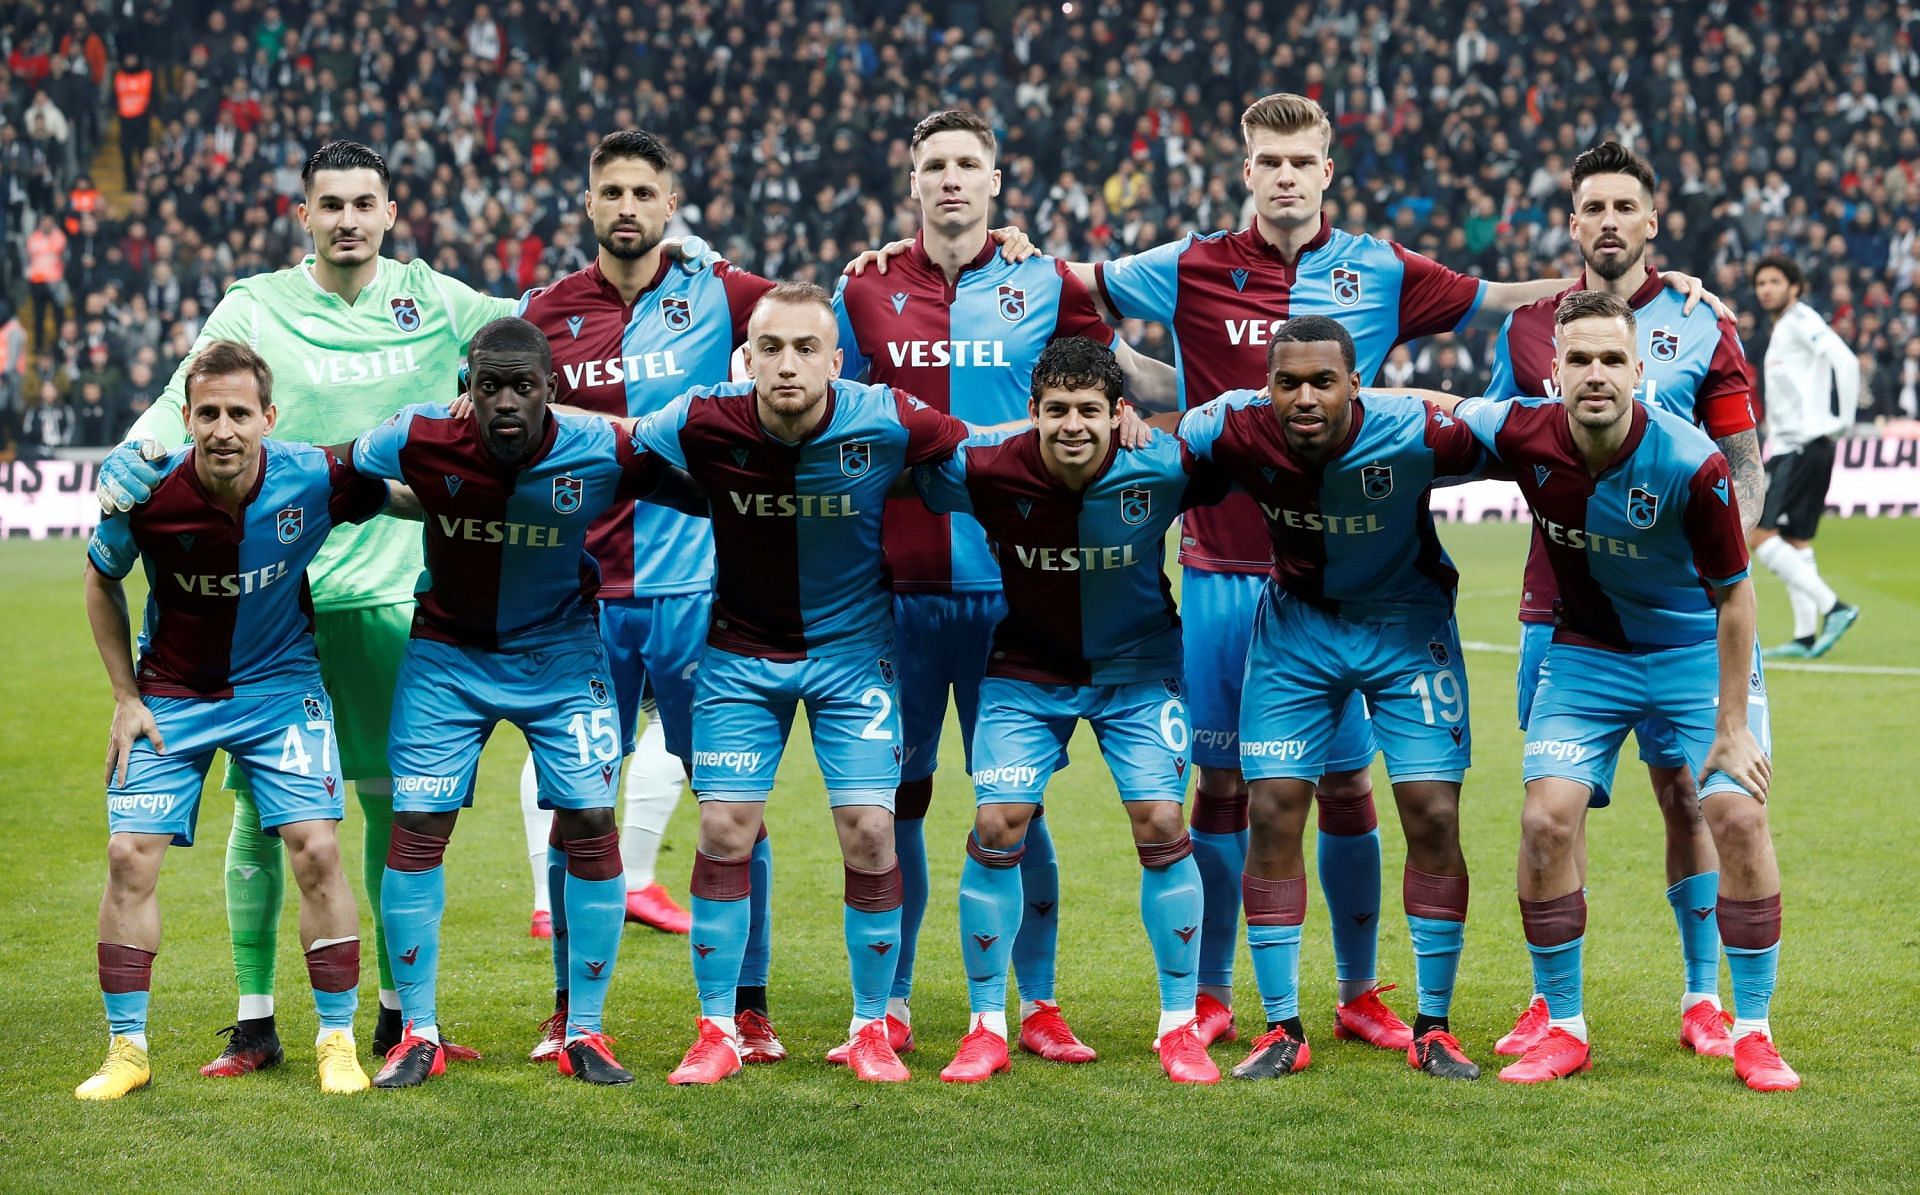 The current league leaders in Turkish S&uuml;per Lig :Trabzonspor